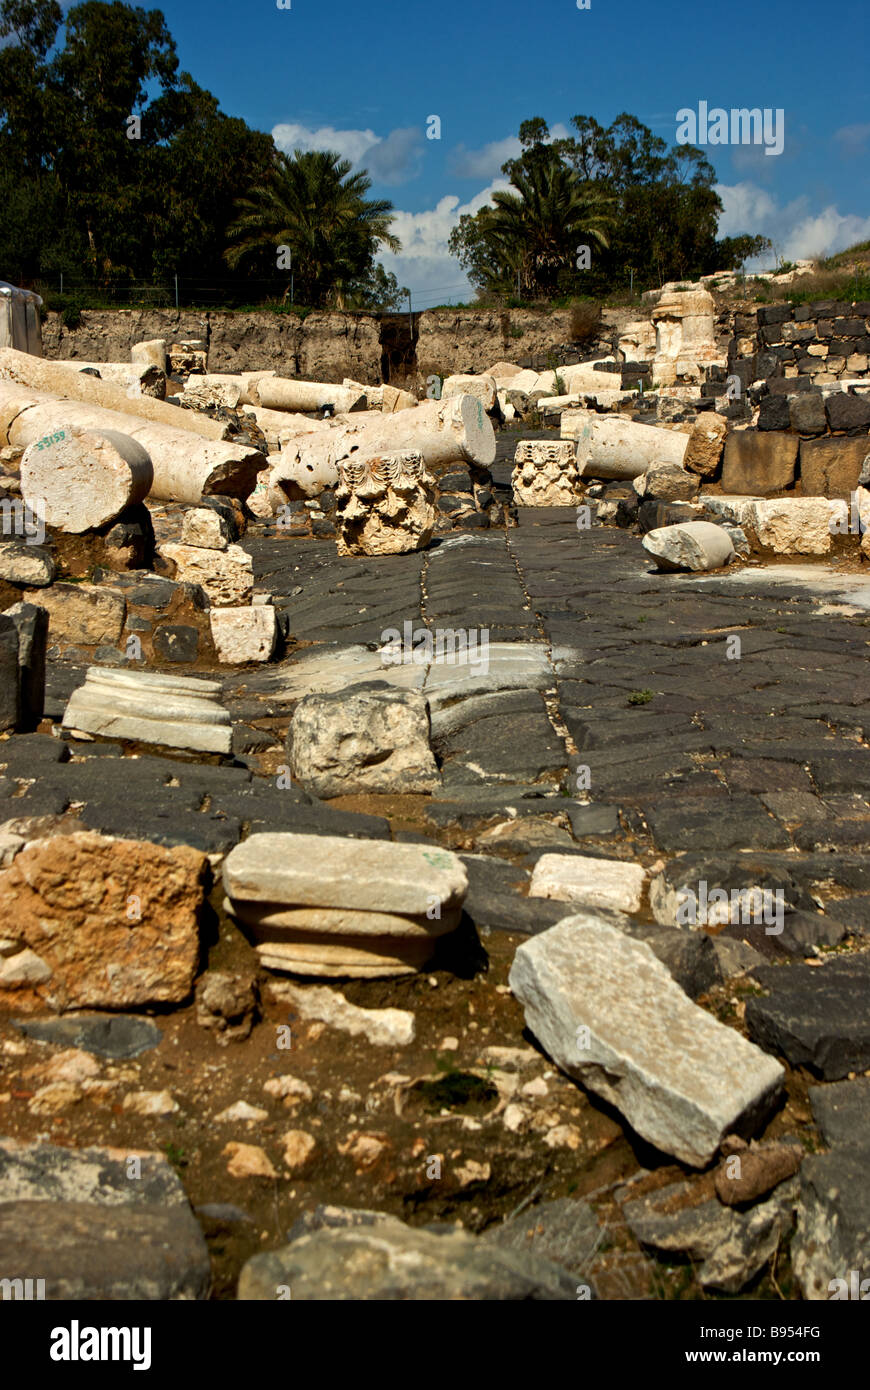 Earthquake toppled building debris ruins and upheaved stone floors in archaeological excavation site at Bet She an Stock Photo